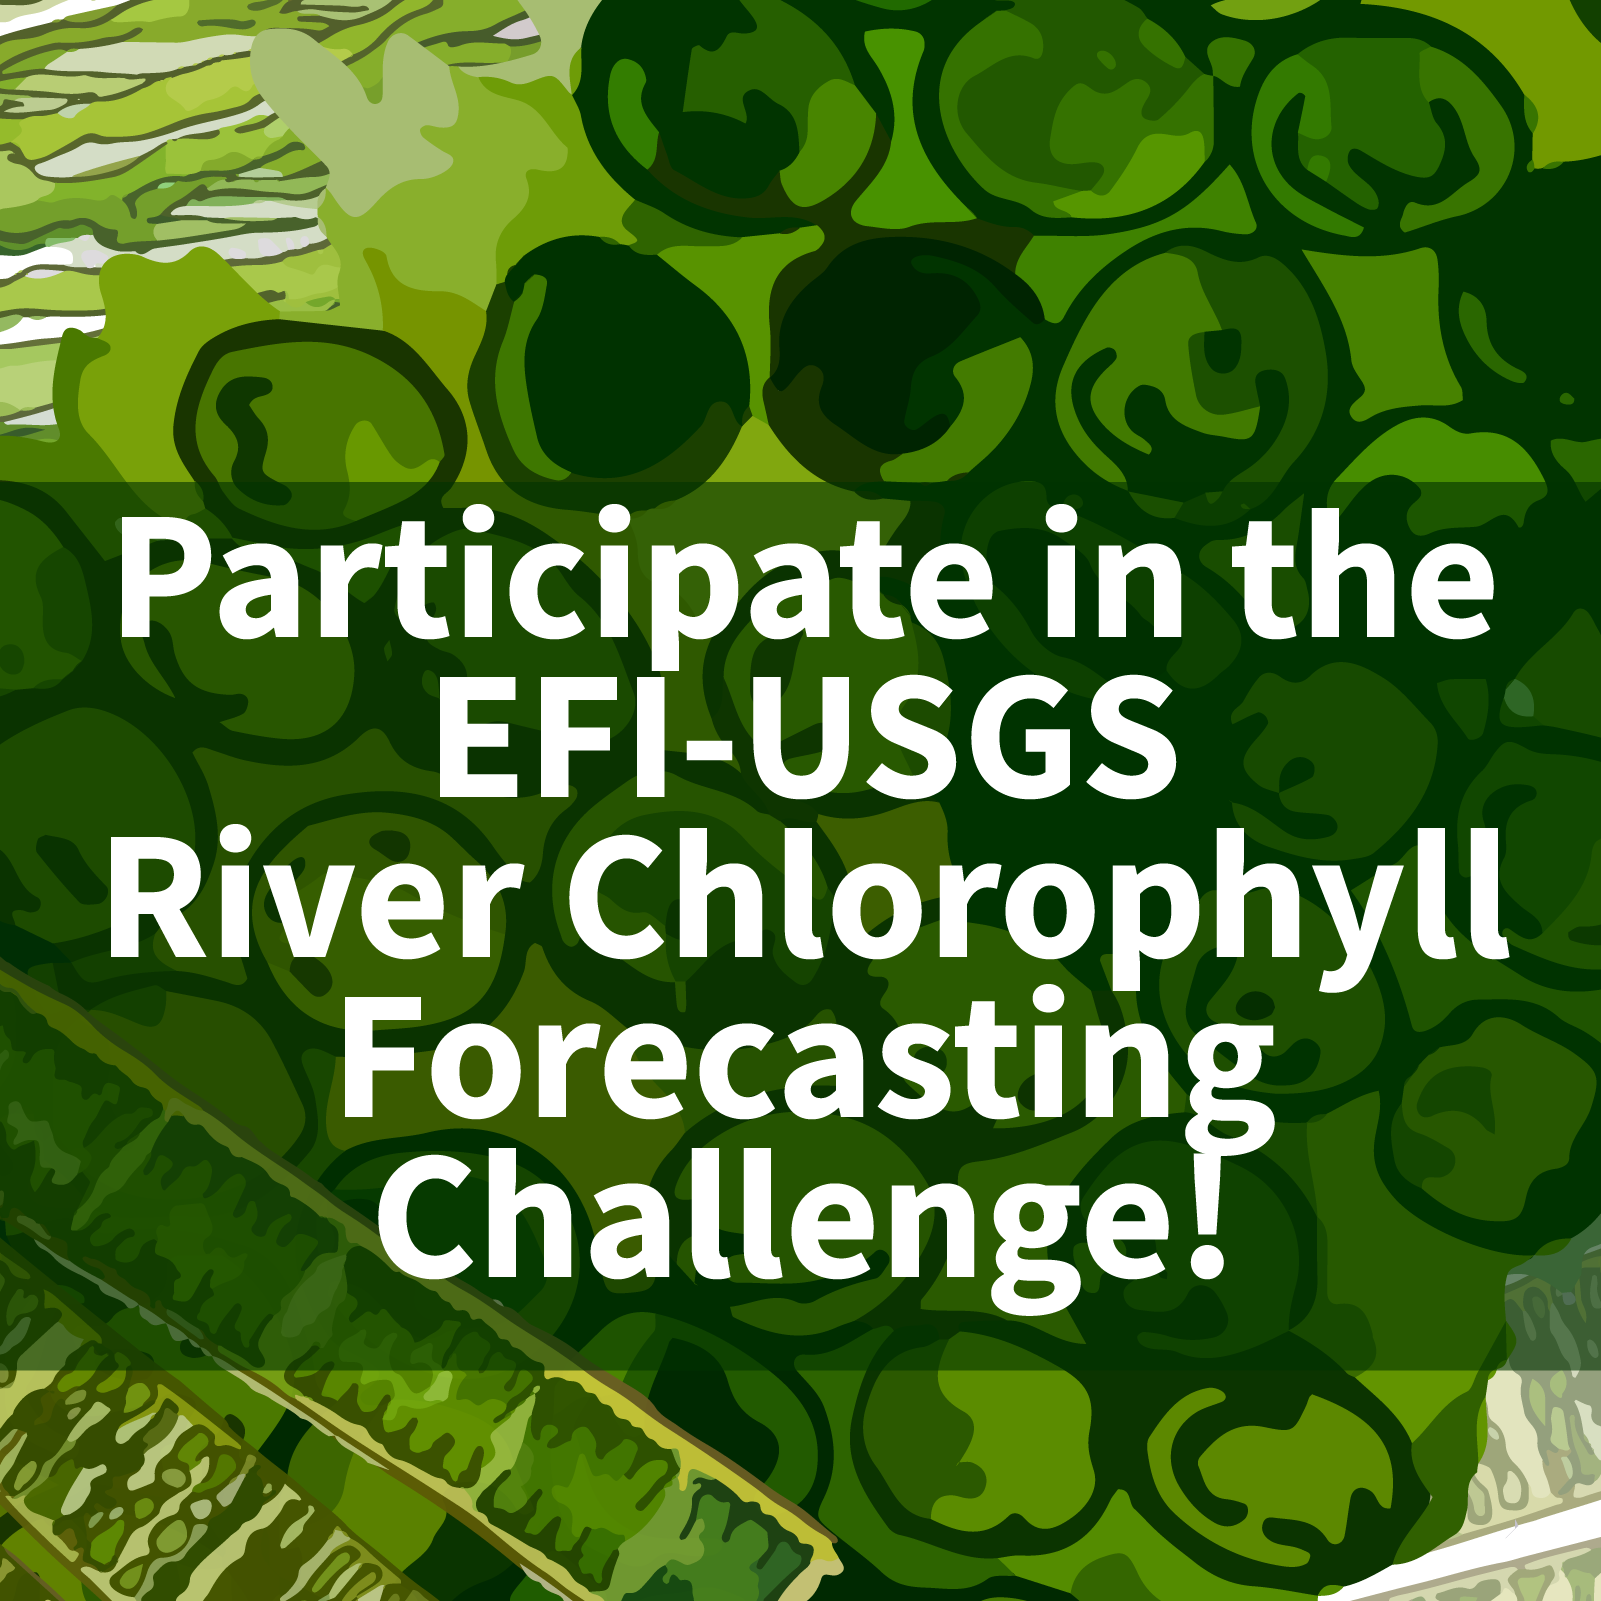 Participate in the EFI-USGS River Chlorophyll Forecasting Challenge!